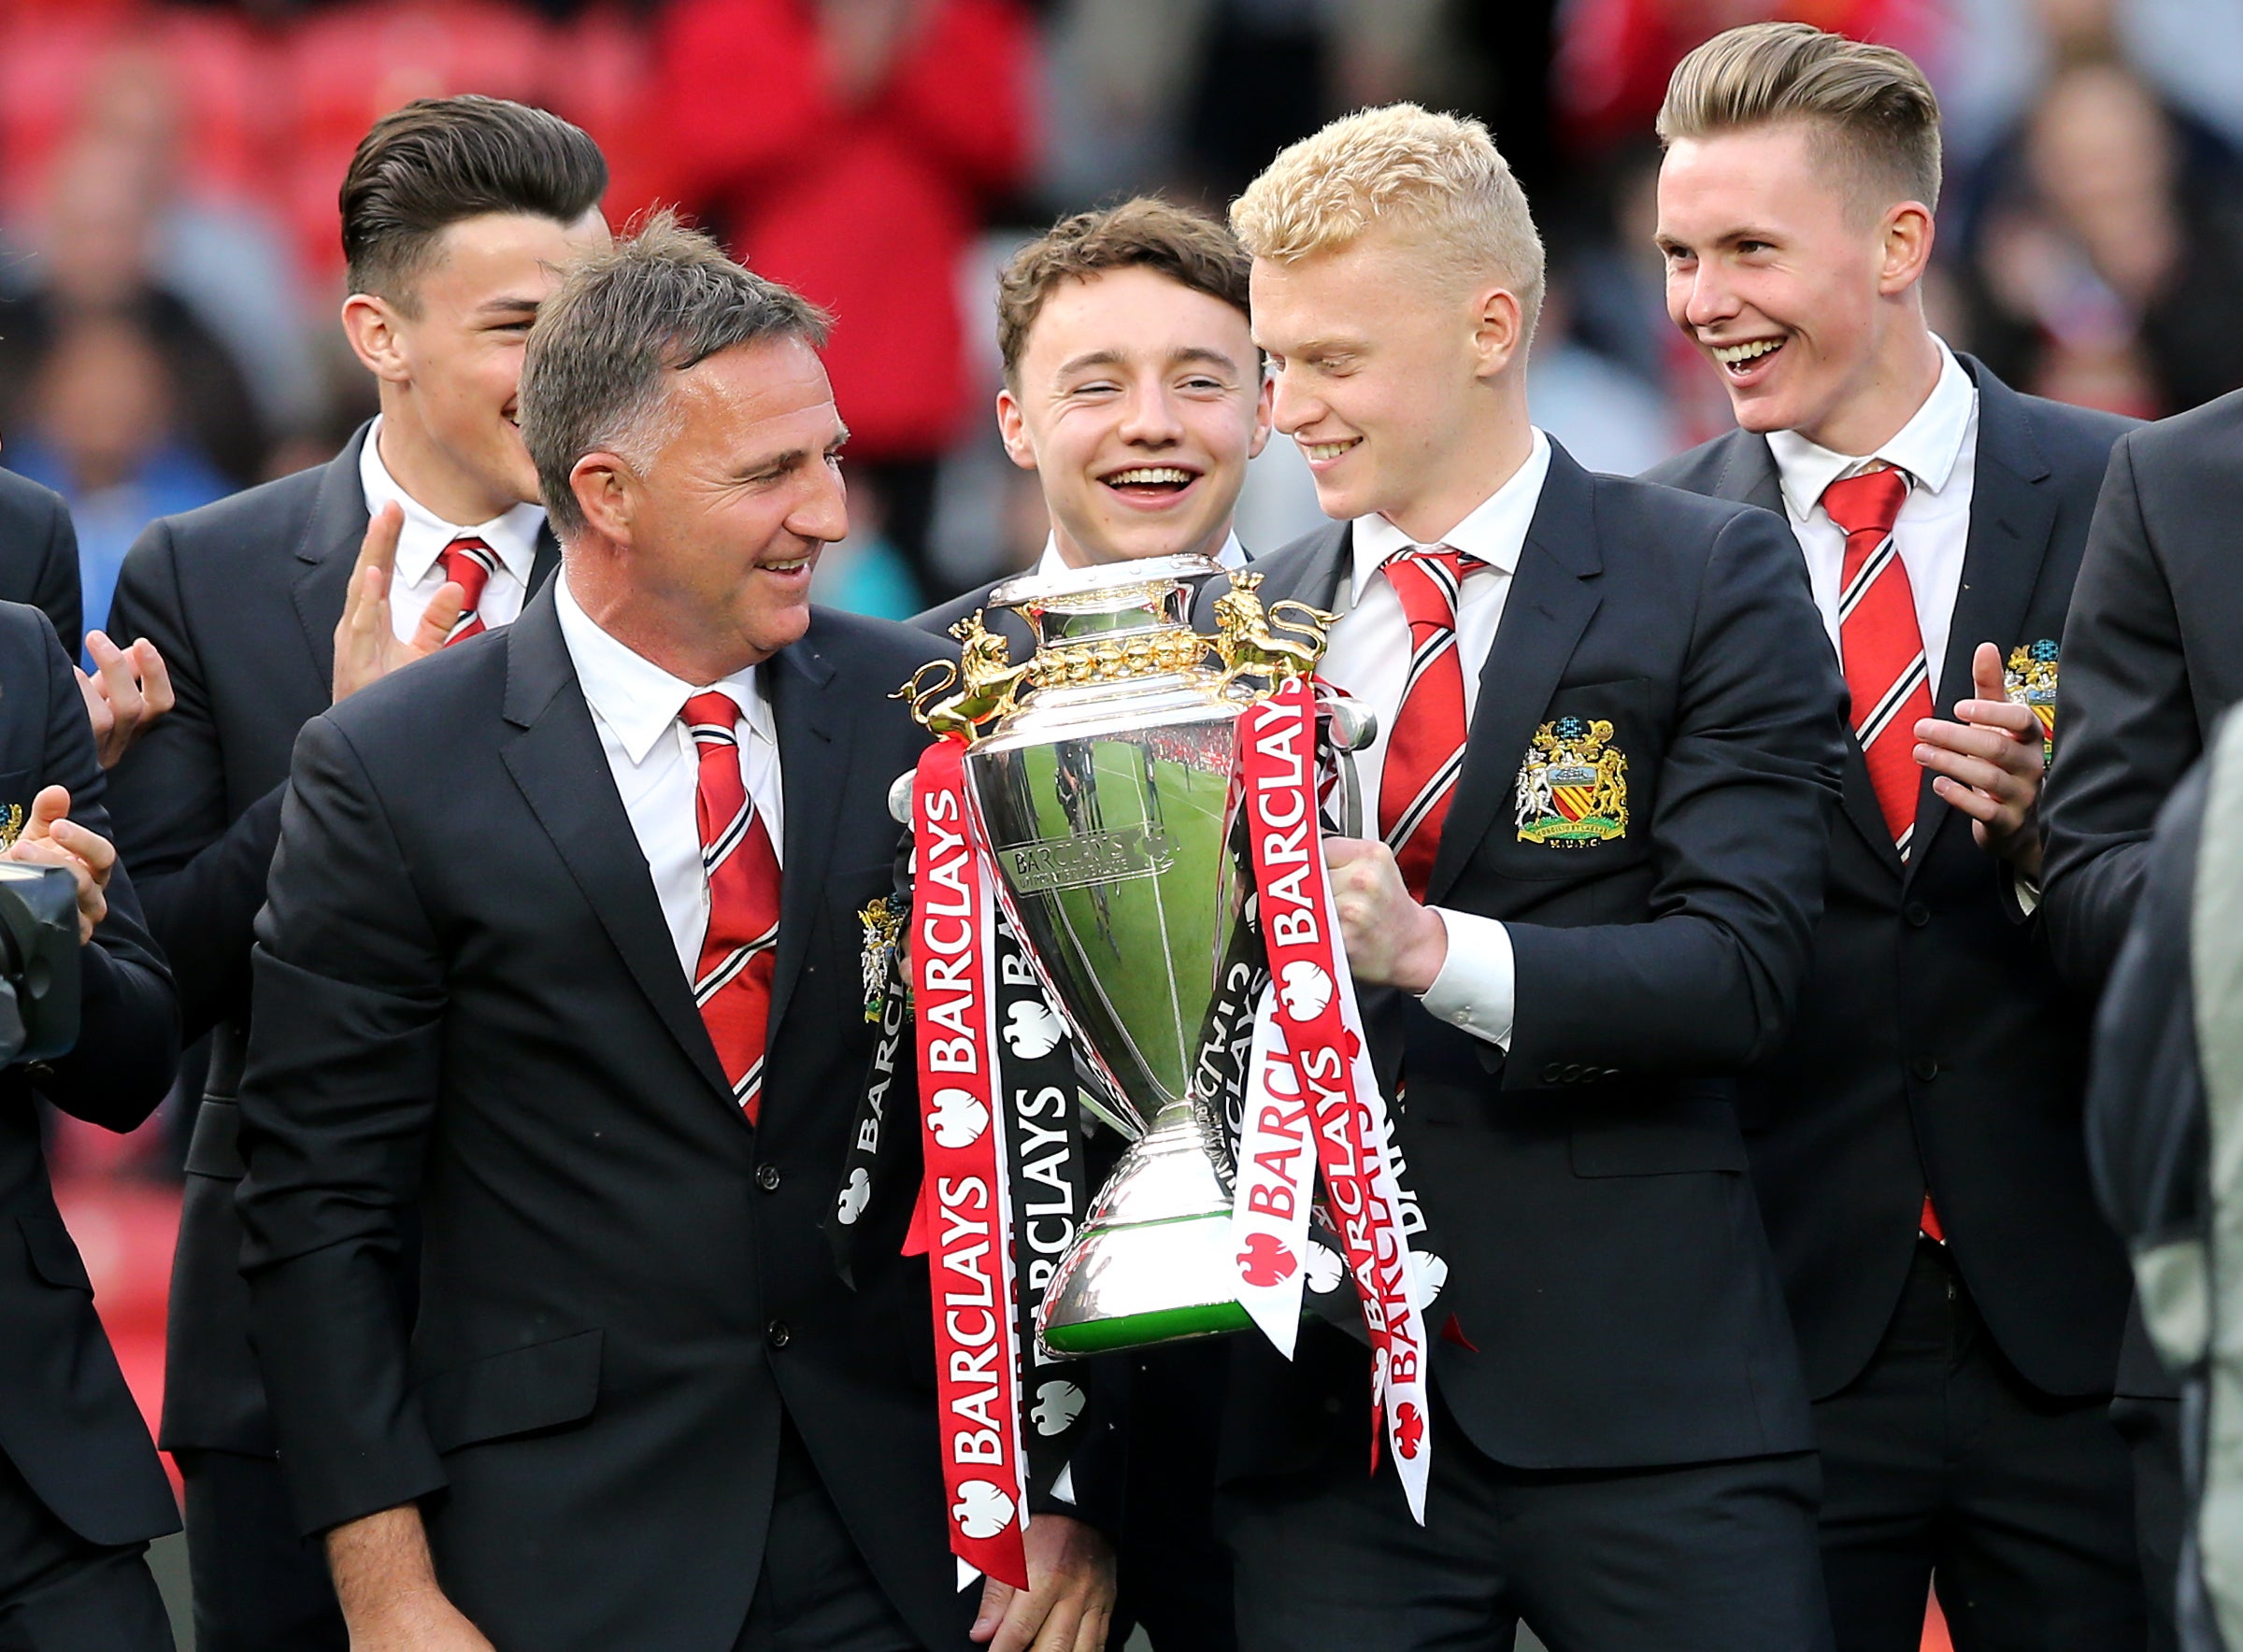 Manchester United Under-21s captain James Weir holds the U21 Premier League trophy at Old Trafford in 2016 (Martin Rickett/PA)